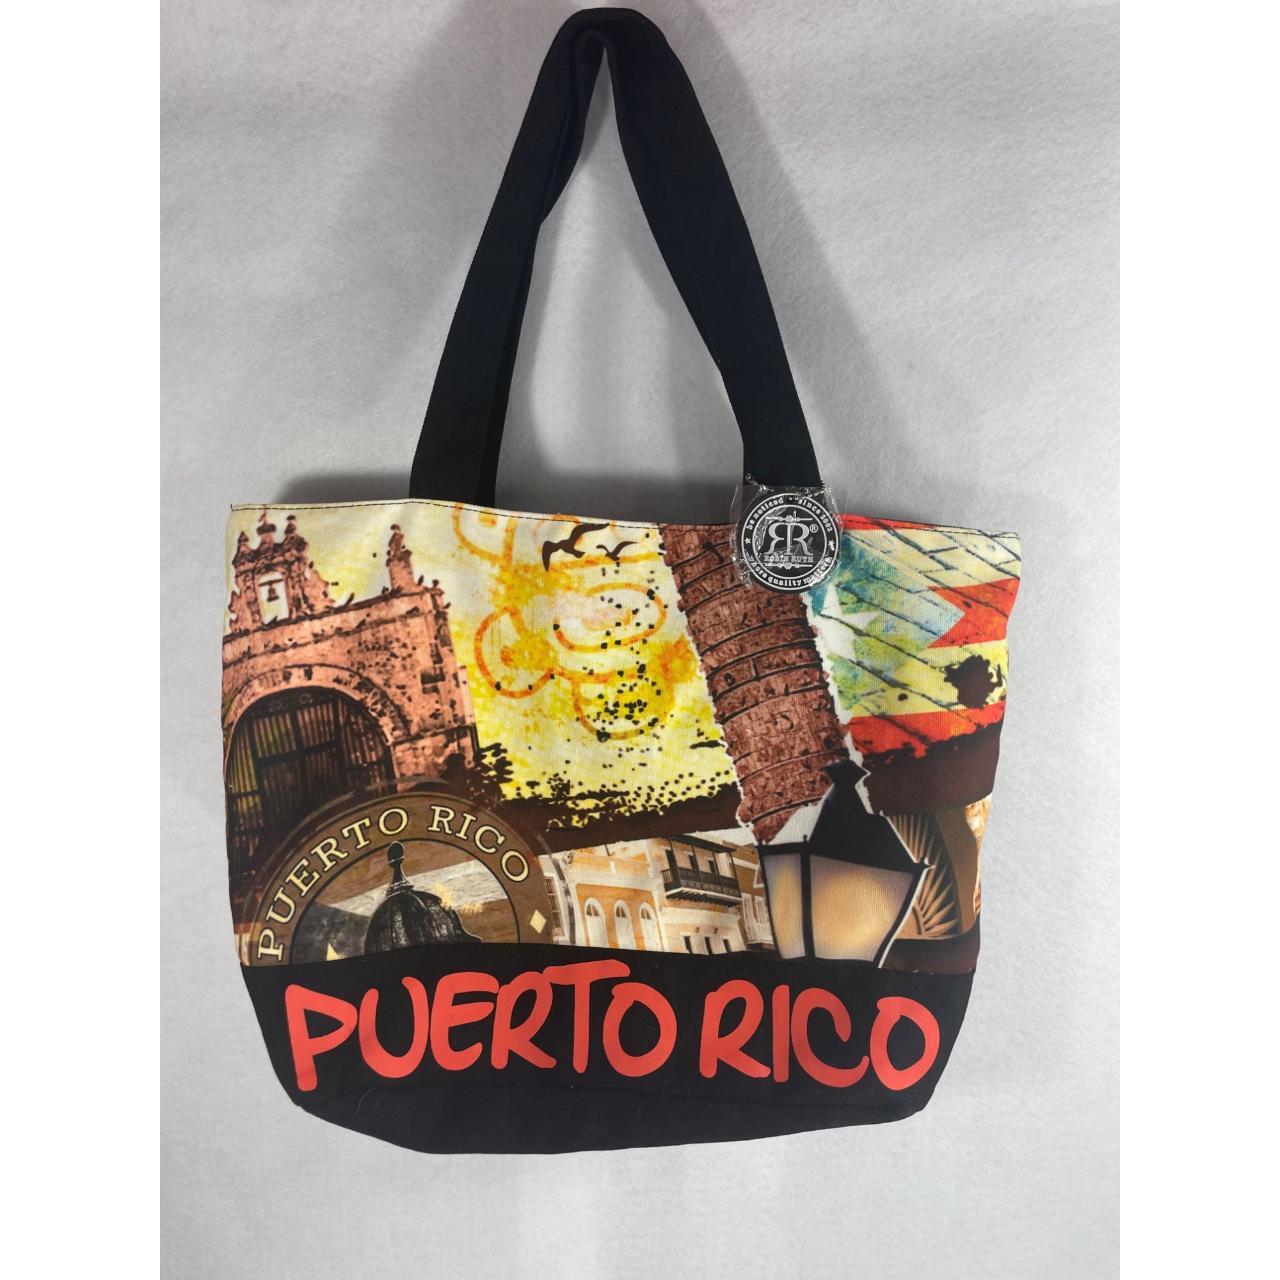 Robin Ruth Womens Tote Bag - New York Empire State Building | eBay